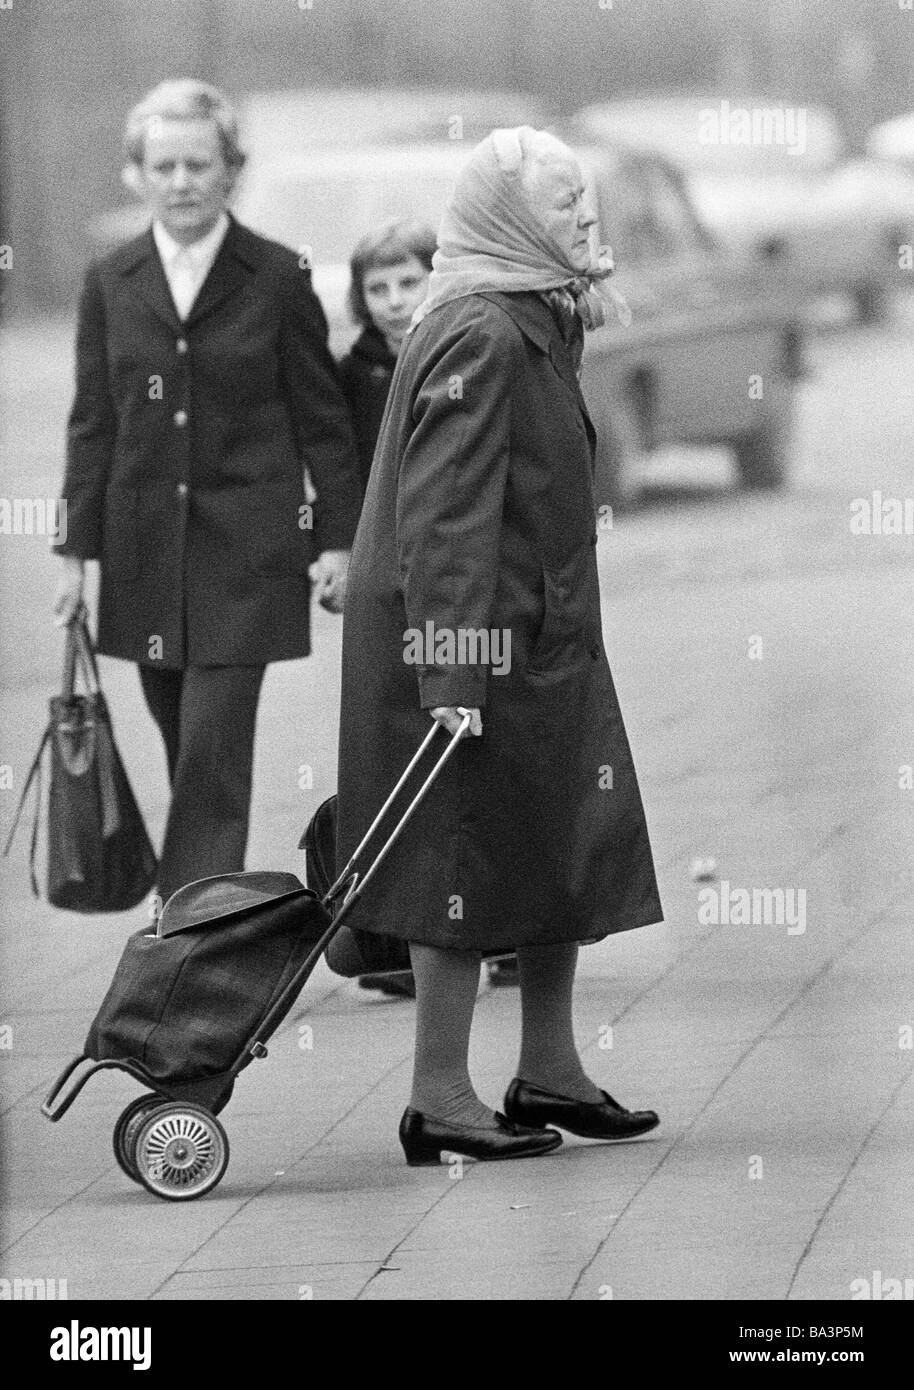 Seventies, black and white photo, people, older woman goes shopping with a shopping trolley, aged 70 to 80 years Stock Photo